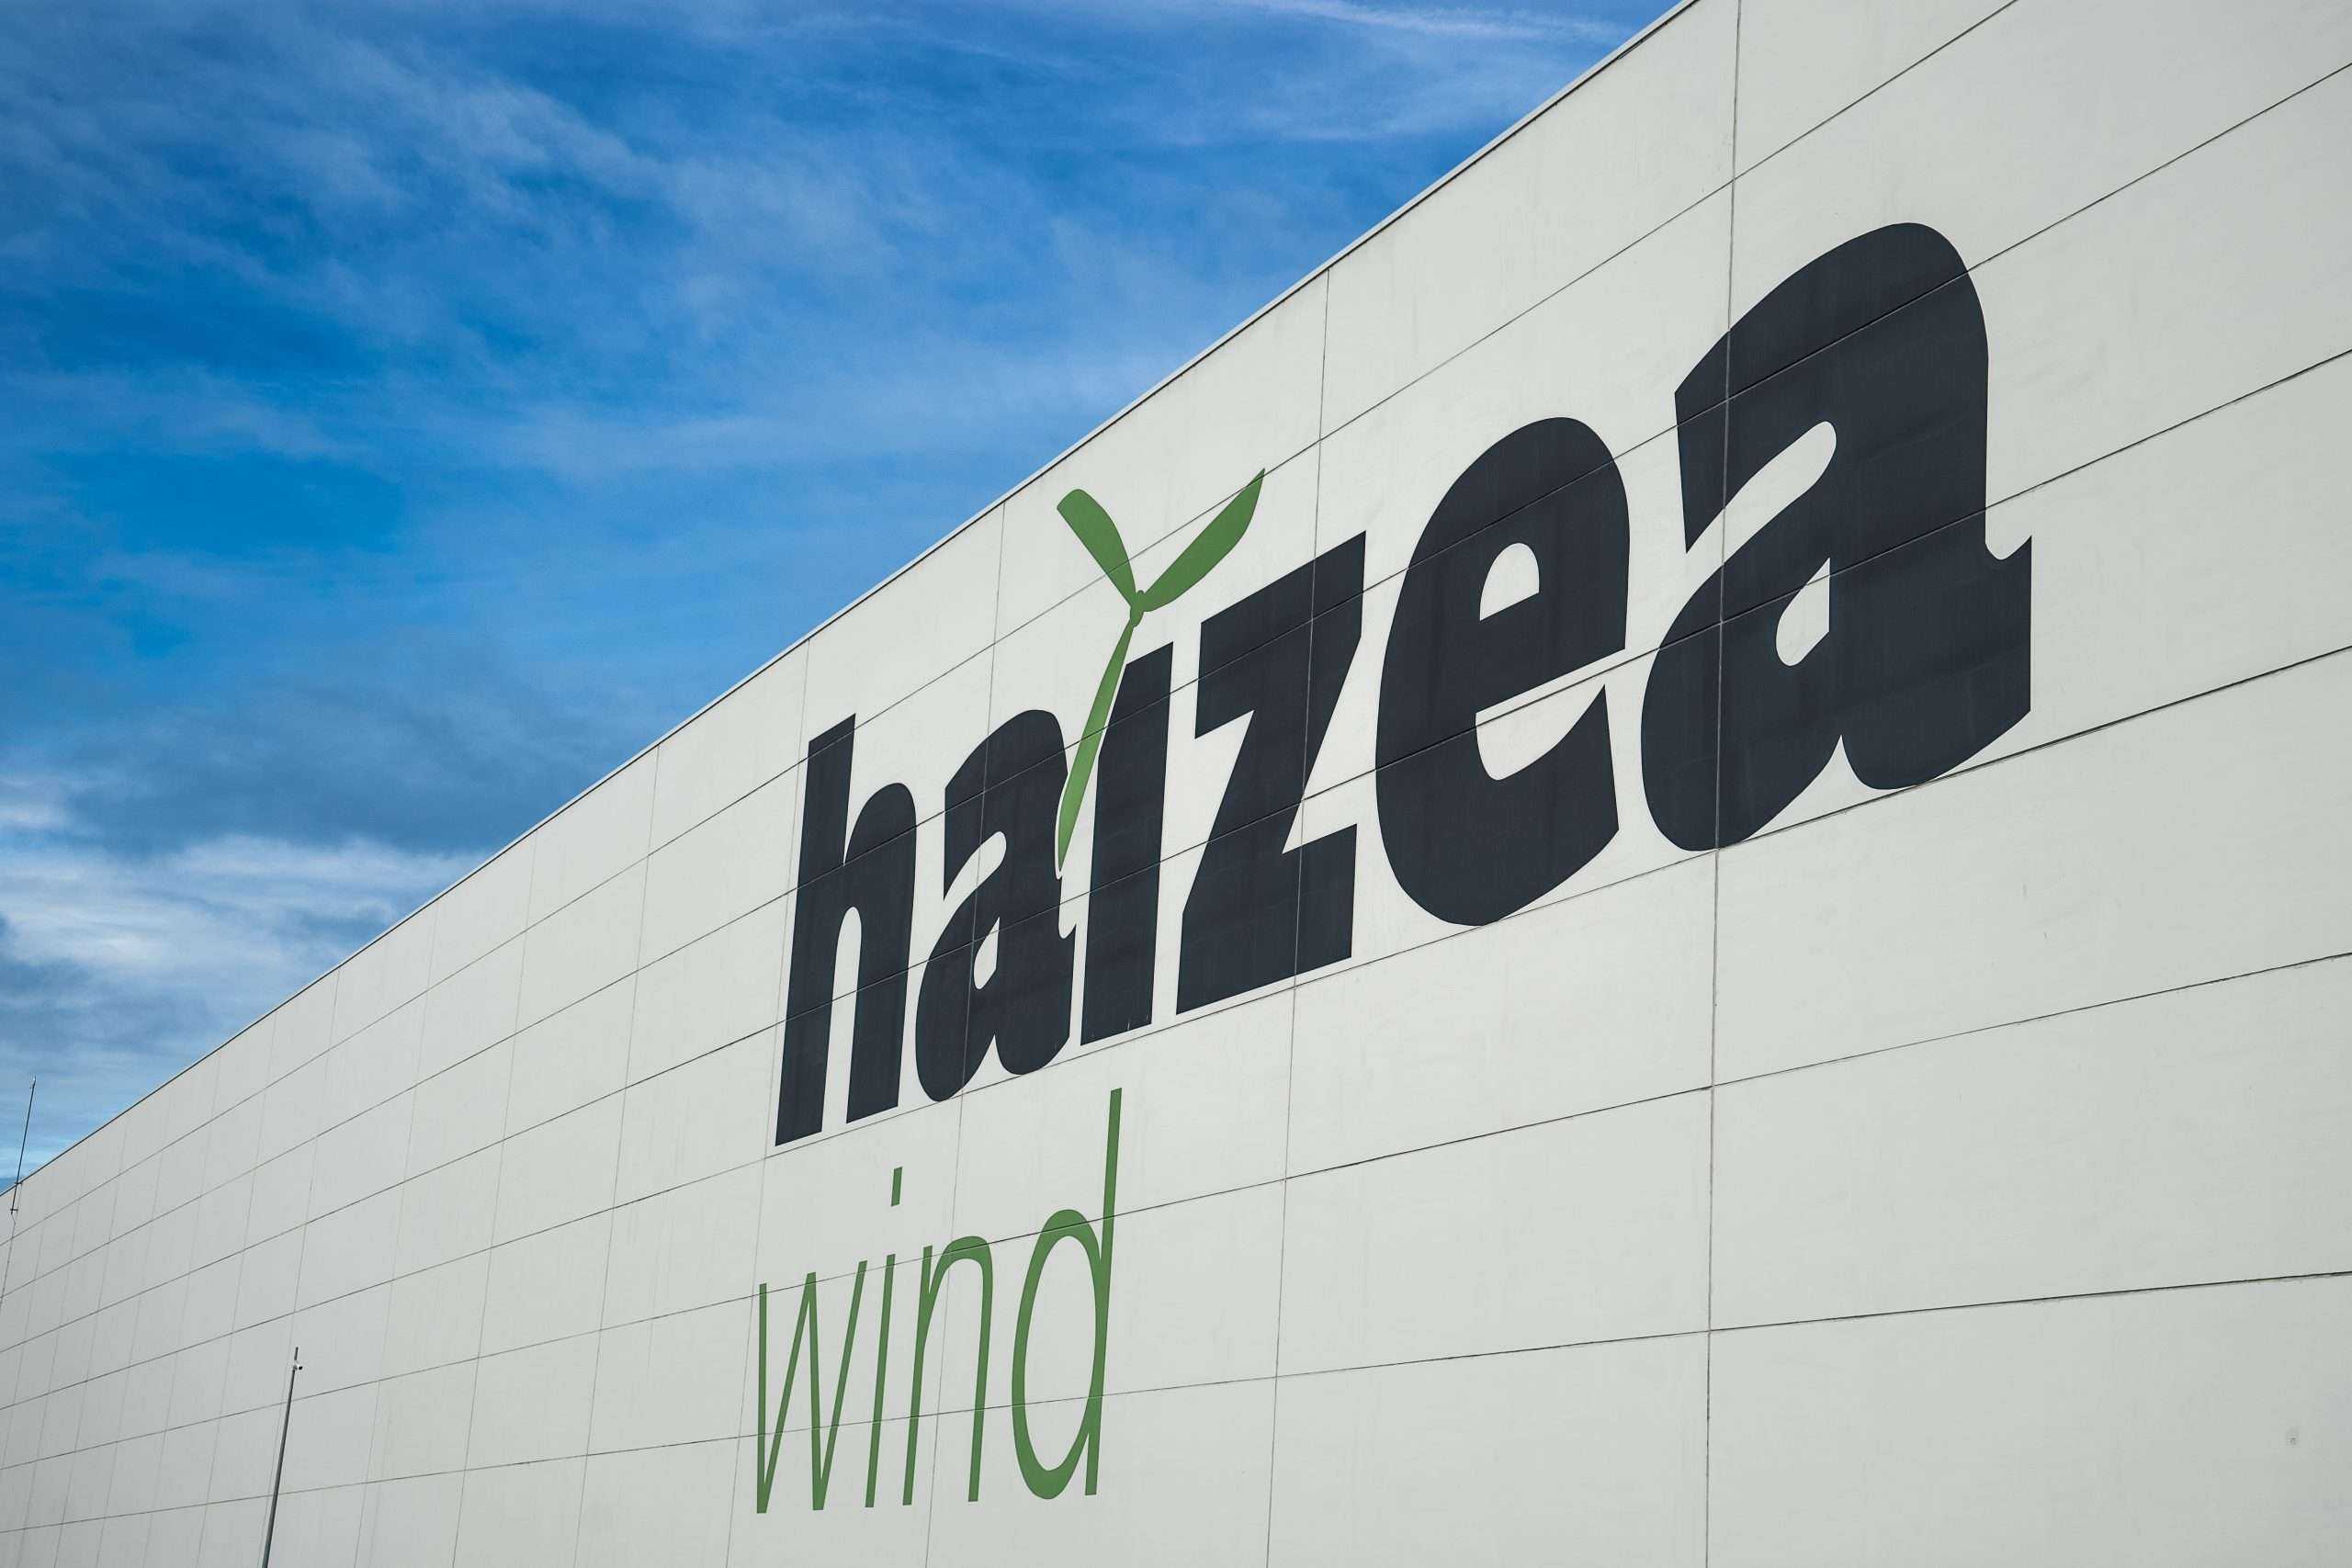 You are currently viewing Basque company Haizea Wind to participate in the Saint Brieuc offshore wind farm that Iberdrola is developing in Brittany, France.